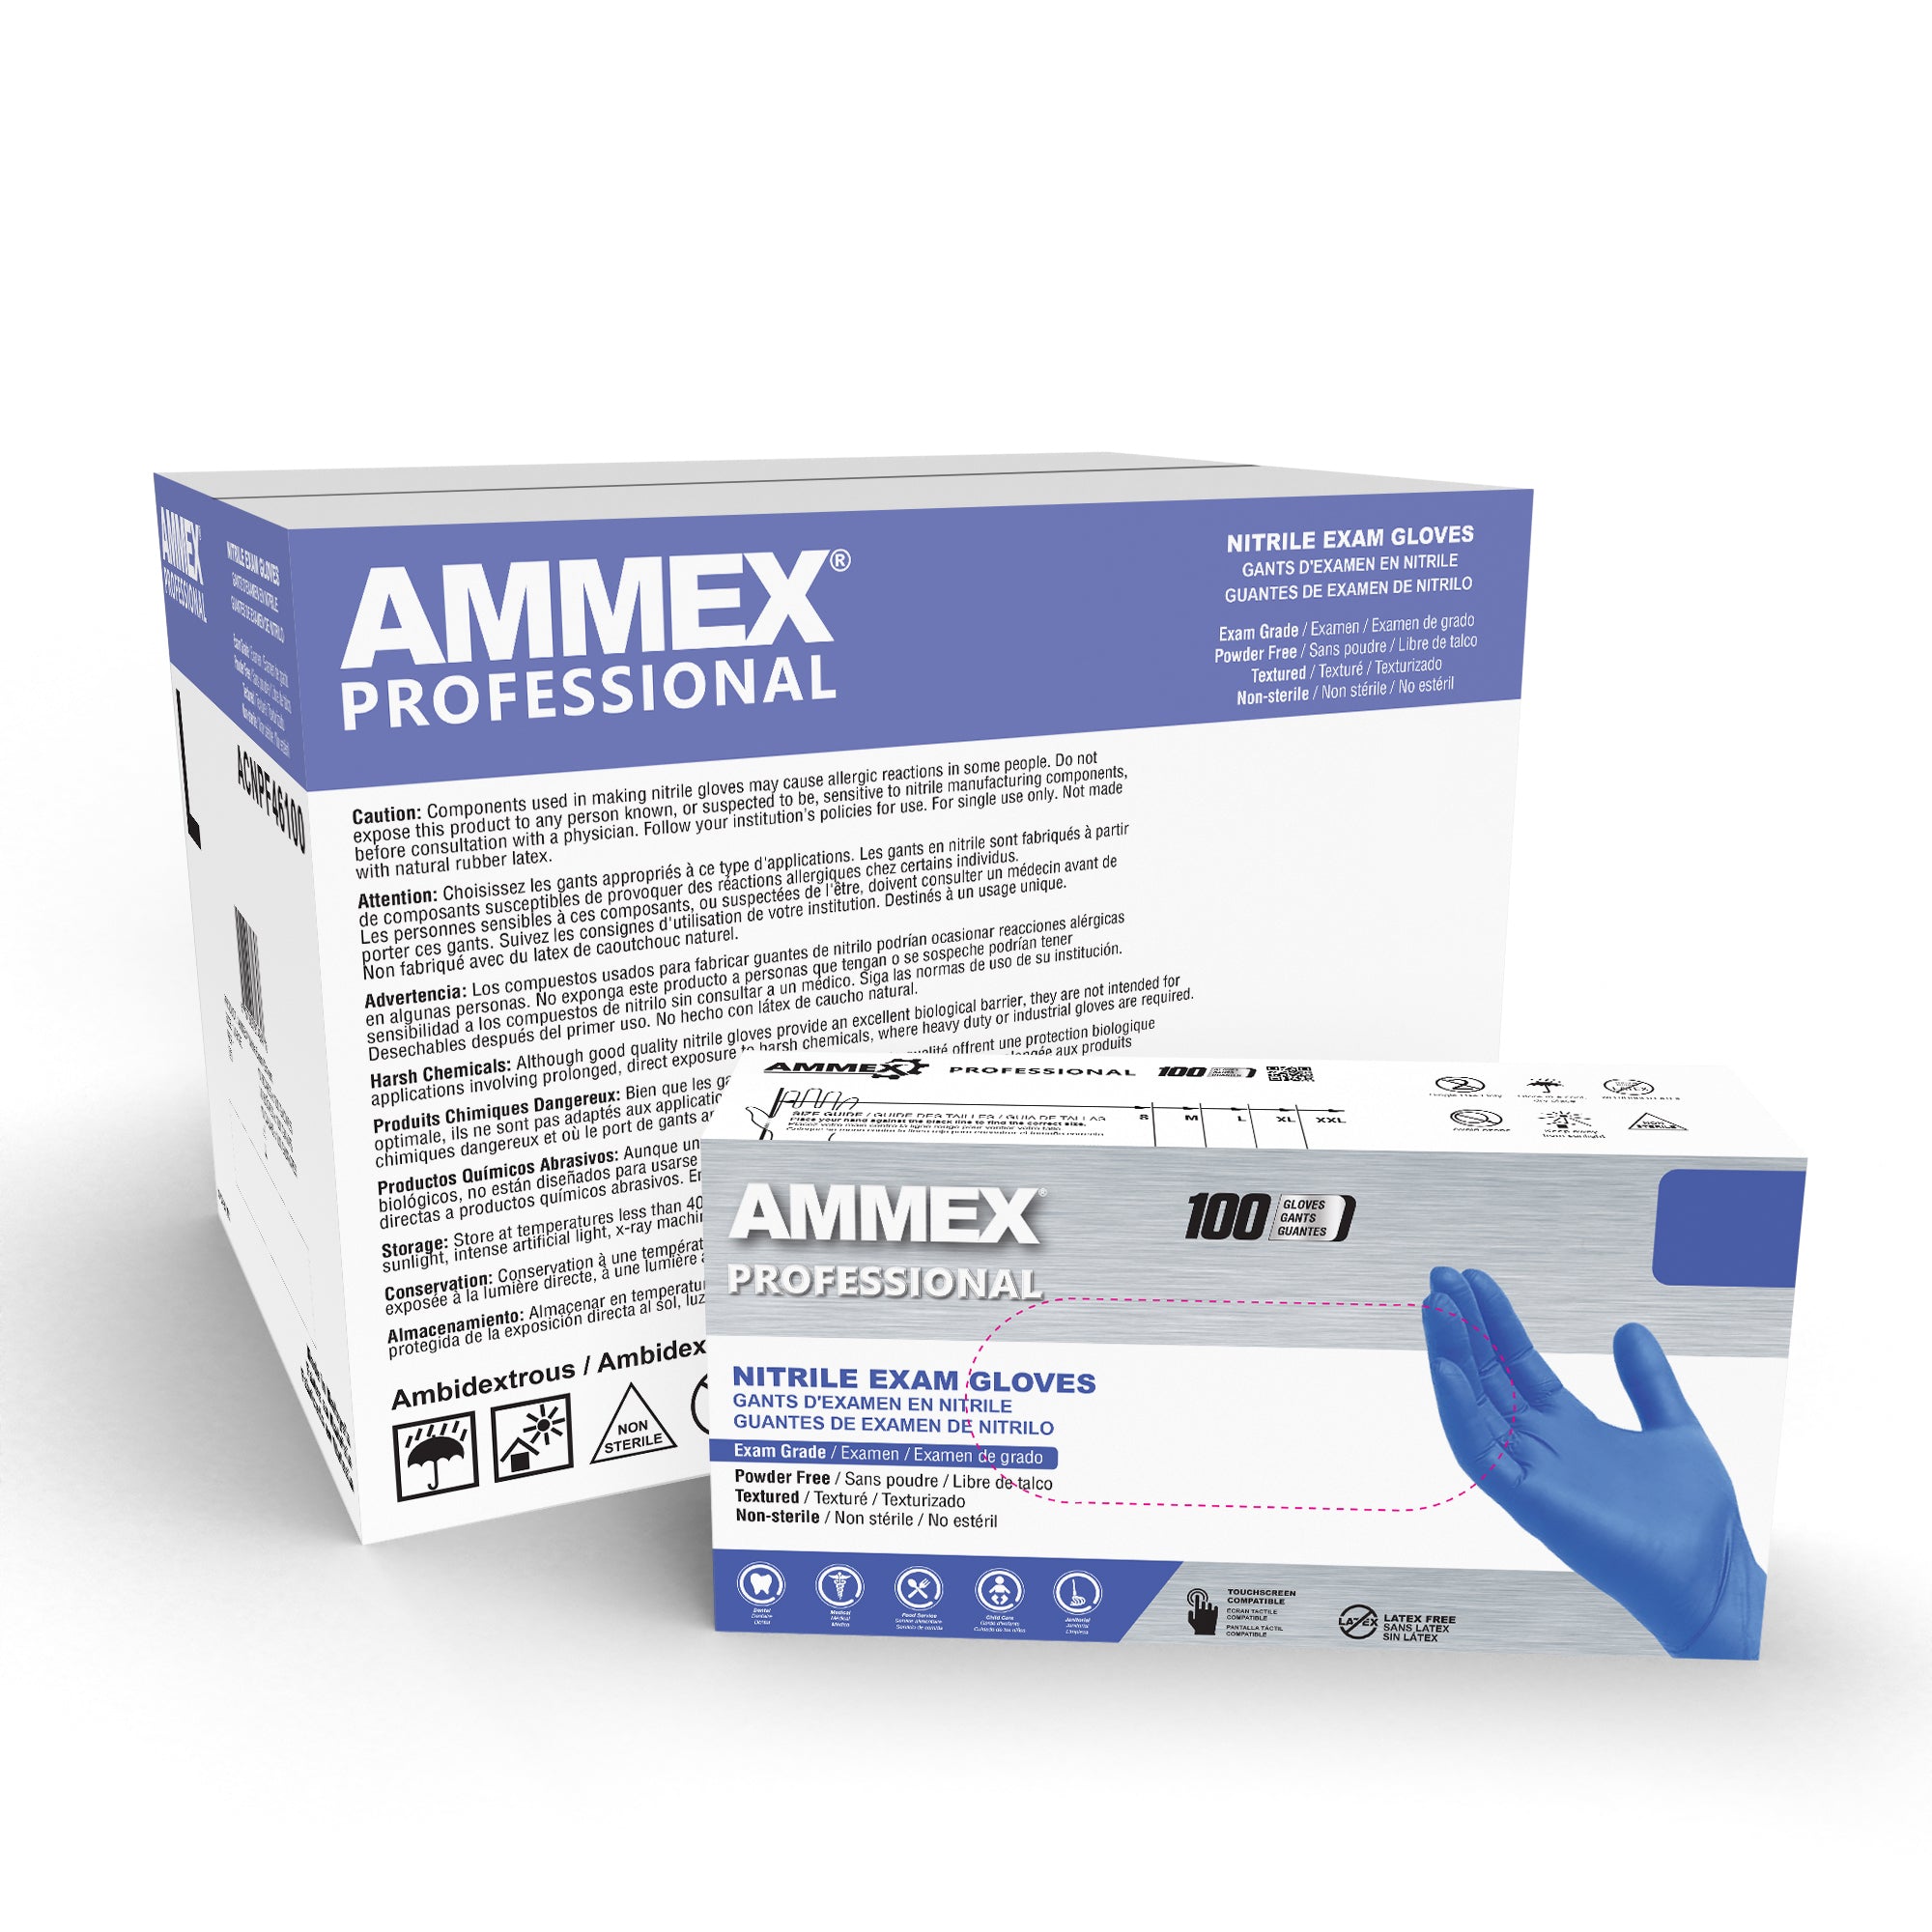 AMMEX Nitrile Gloves Blue 3 Mil Powder and Latex Free Medical Grade Gloves. (Case of 1,000)